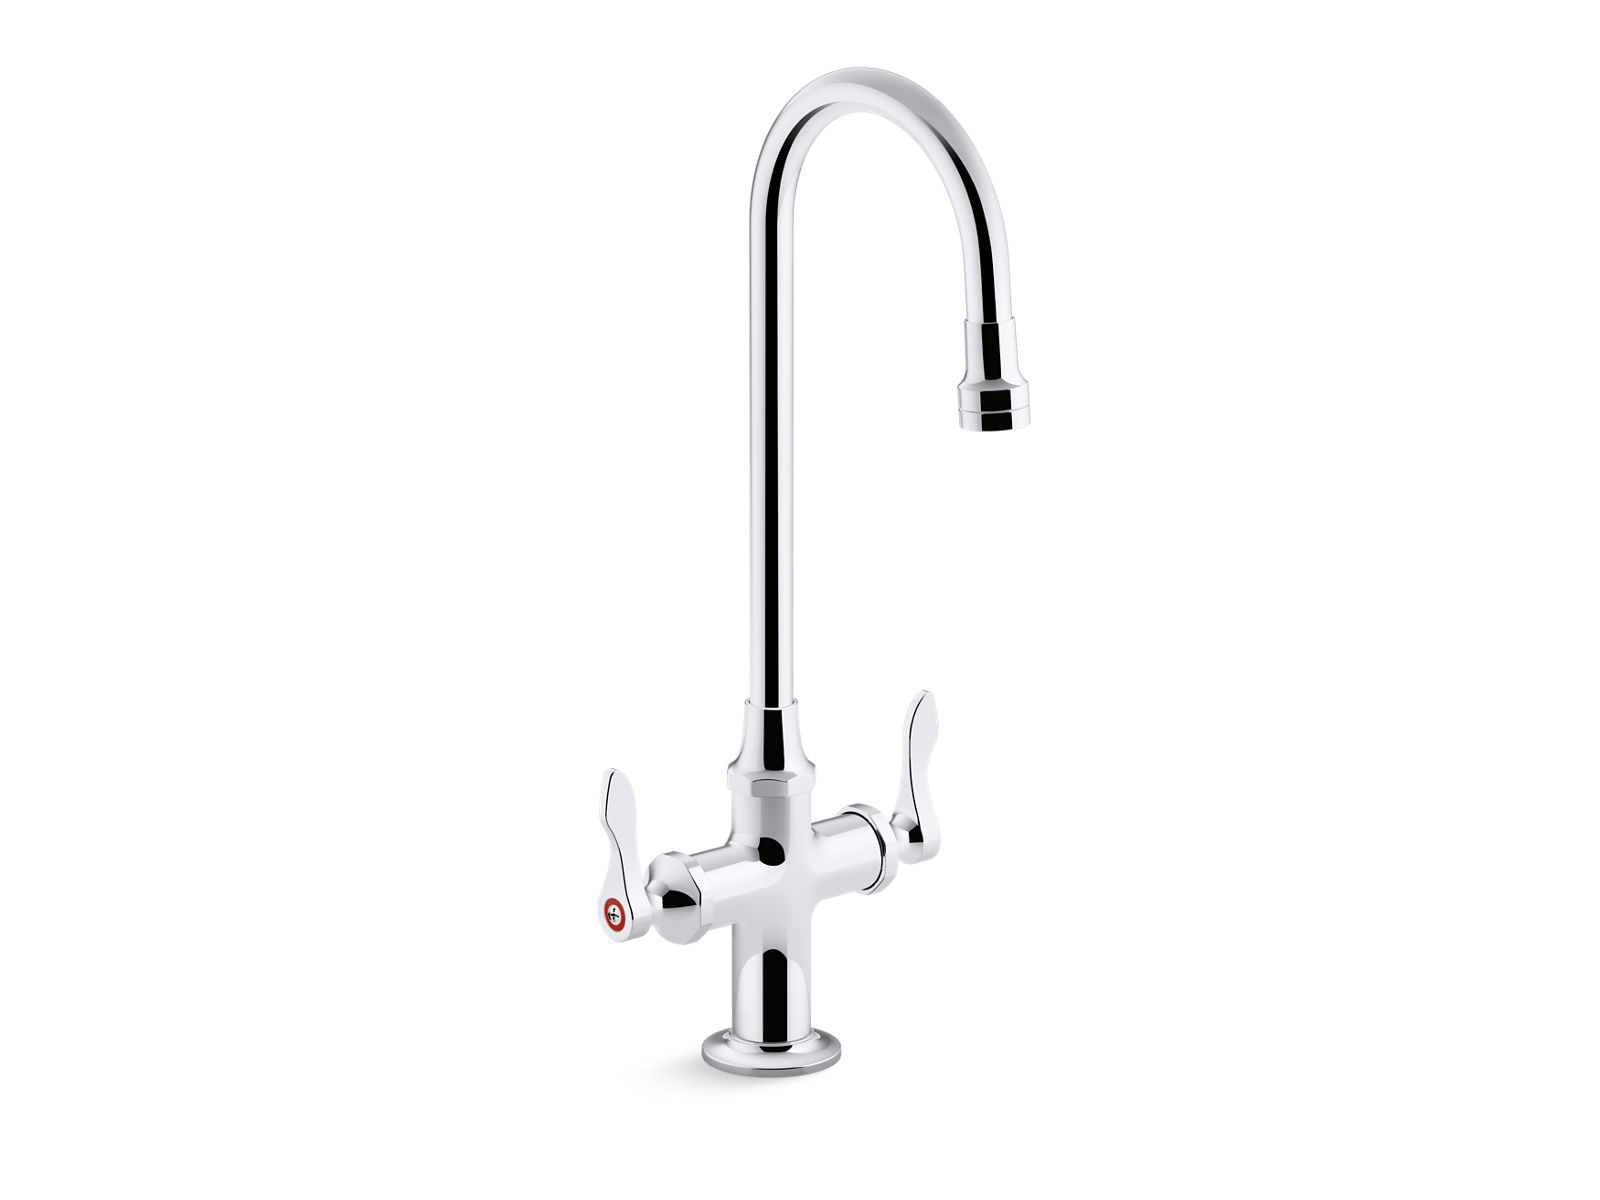 Kohler Co., Bathroom Faucet, Defined by a sleek, contemporary curved profile, Triton Bowe faucets deliver solid brass